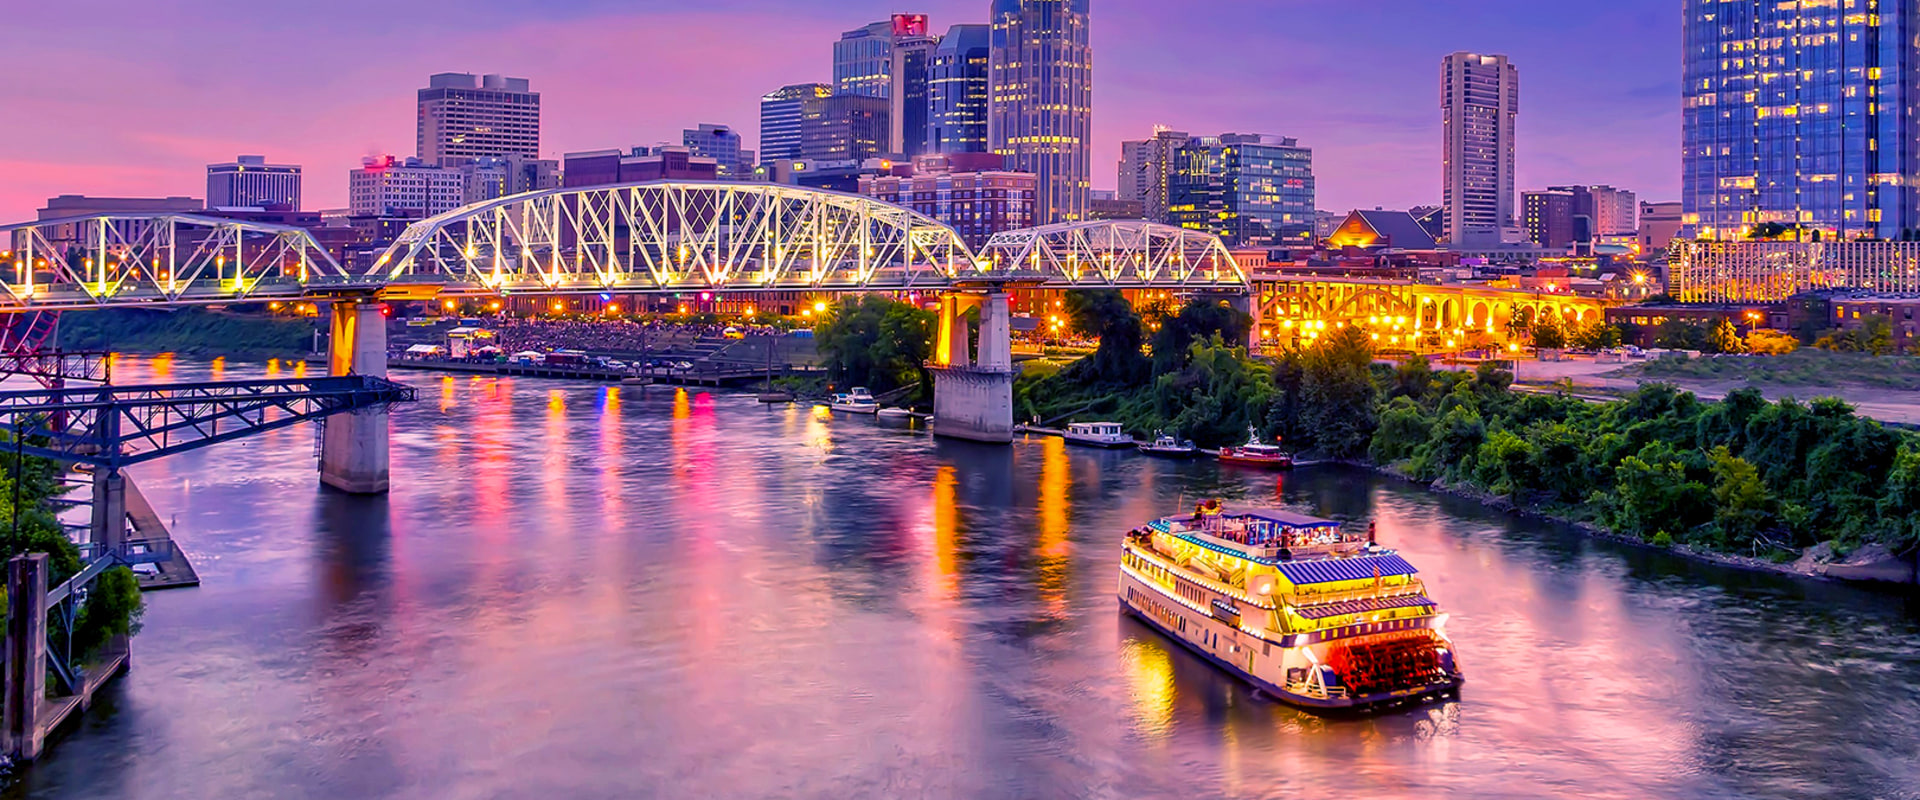 The Ultimate Guide to Staying Updated on Festivals in Nashville, Tennessee